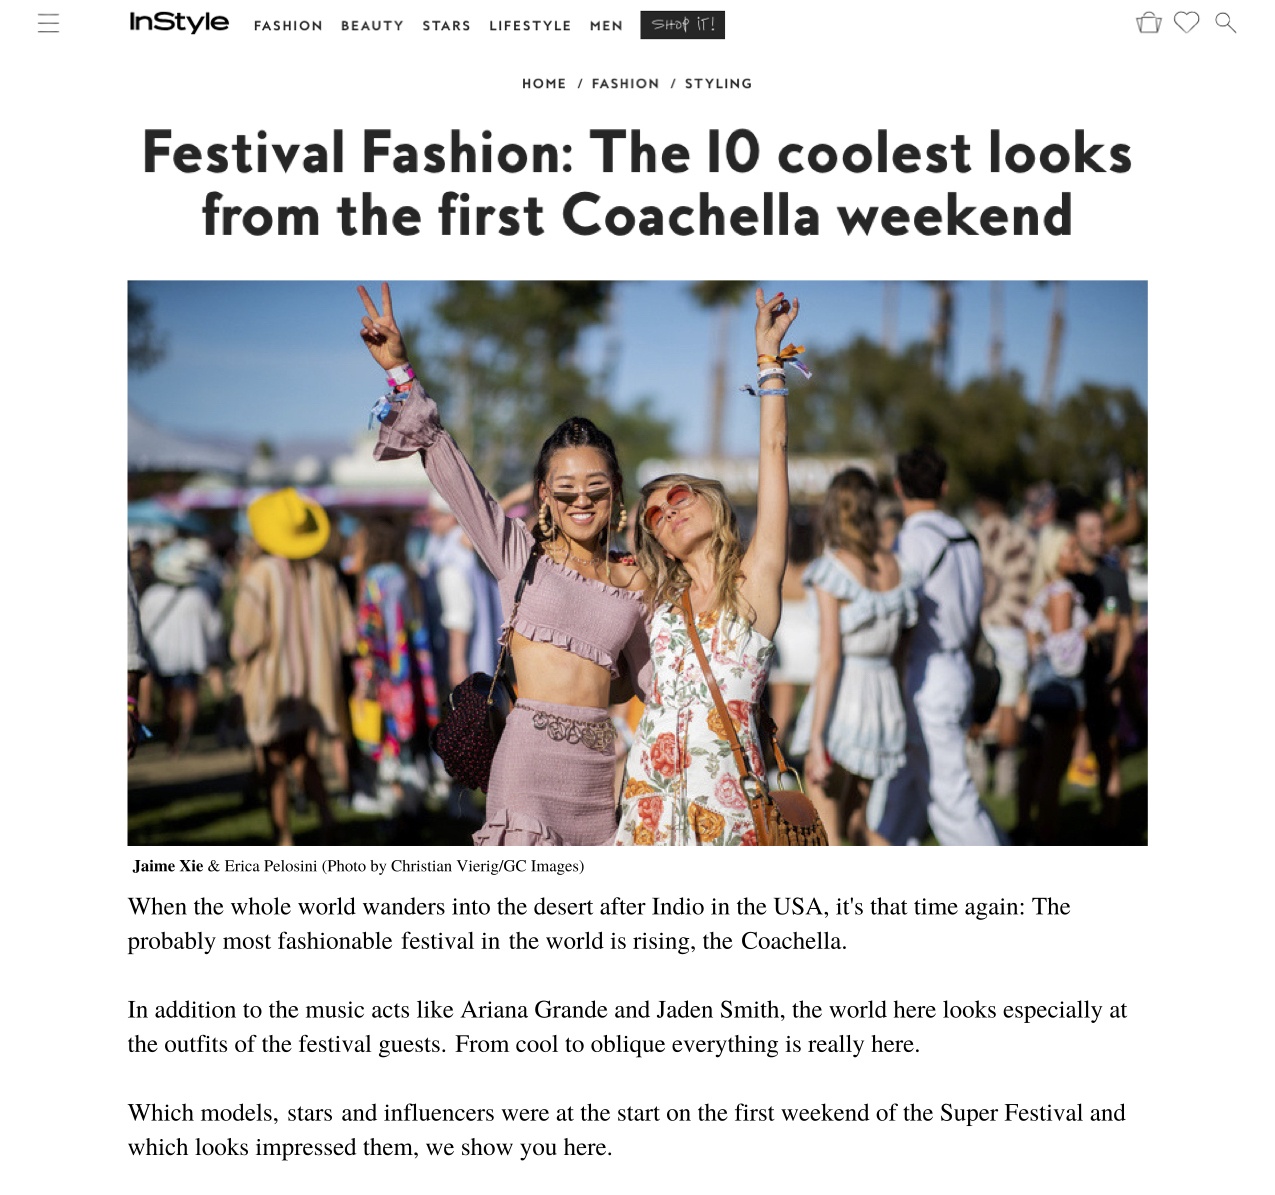 InStyle Germany: Festival Fashion: The 10 Coolest Looks From the First Coachella Weekend